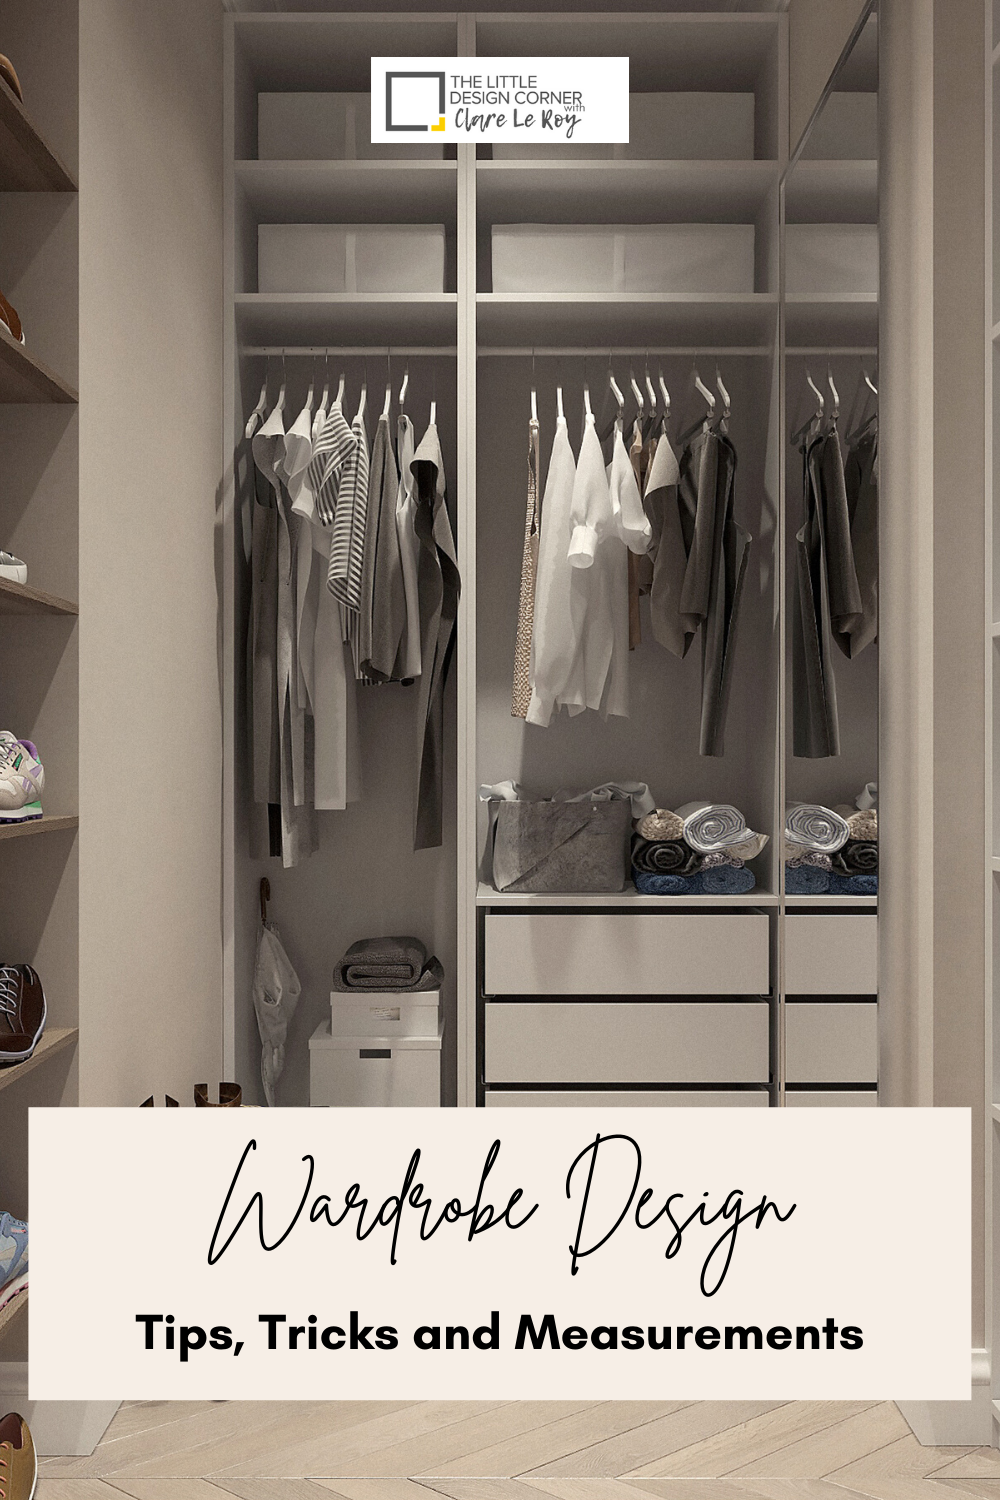 Create your own folding board for a perfectly organized wardrobe